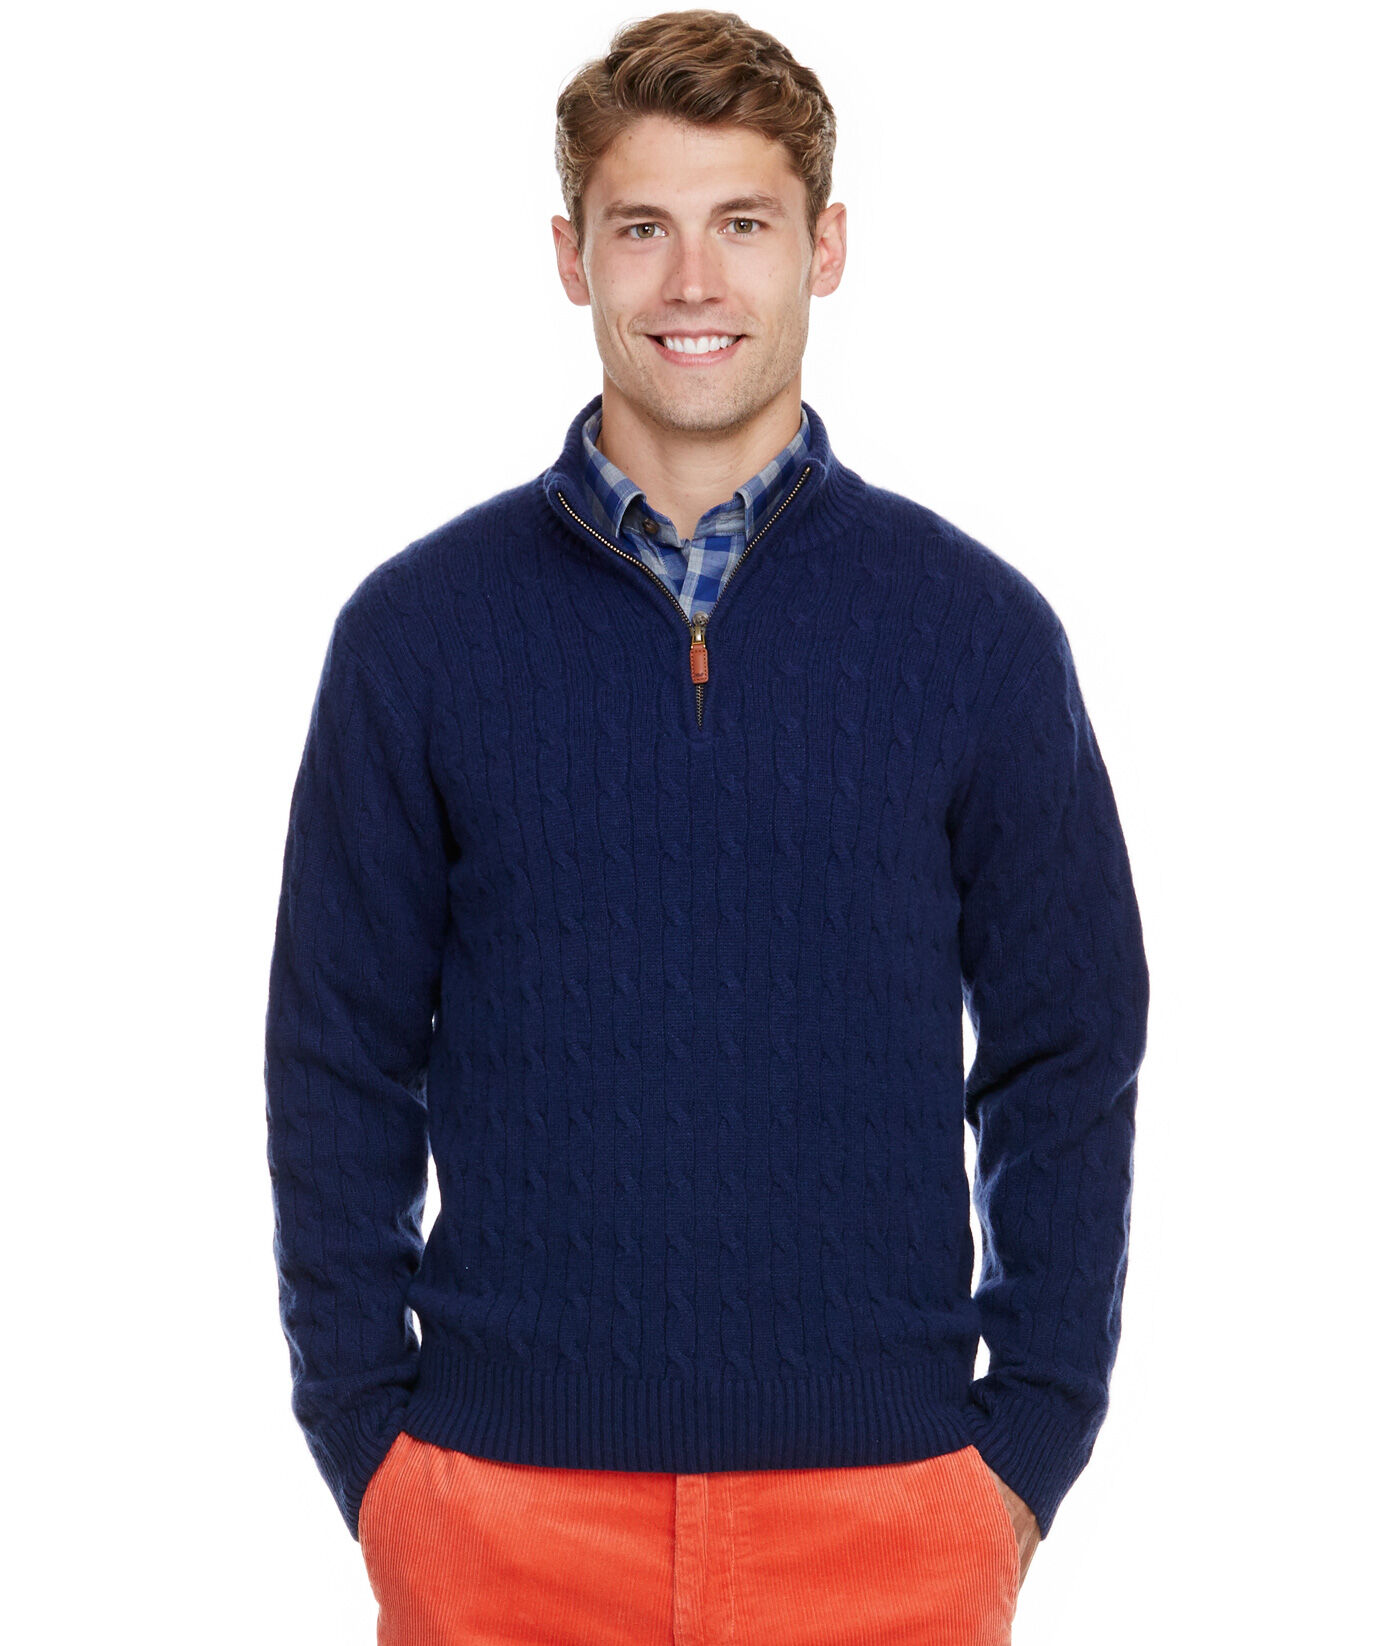 Shop Cashmere Cable 1/4-Zip Sweater at vineyard vines